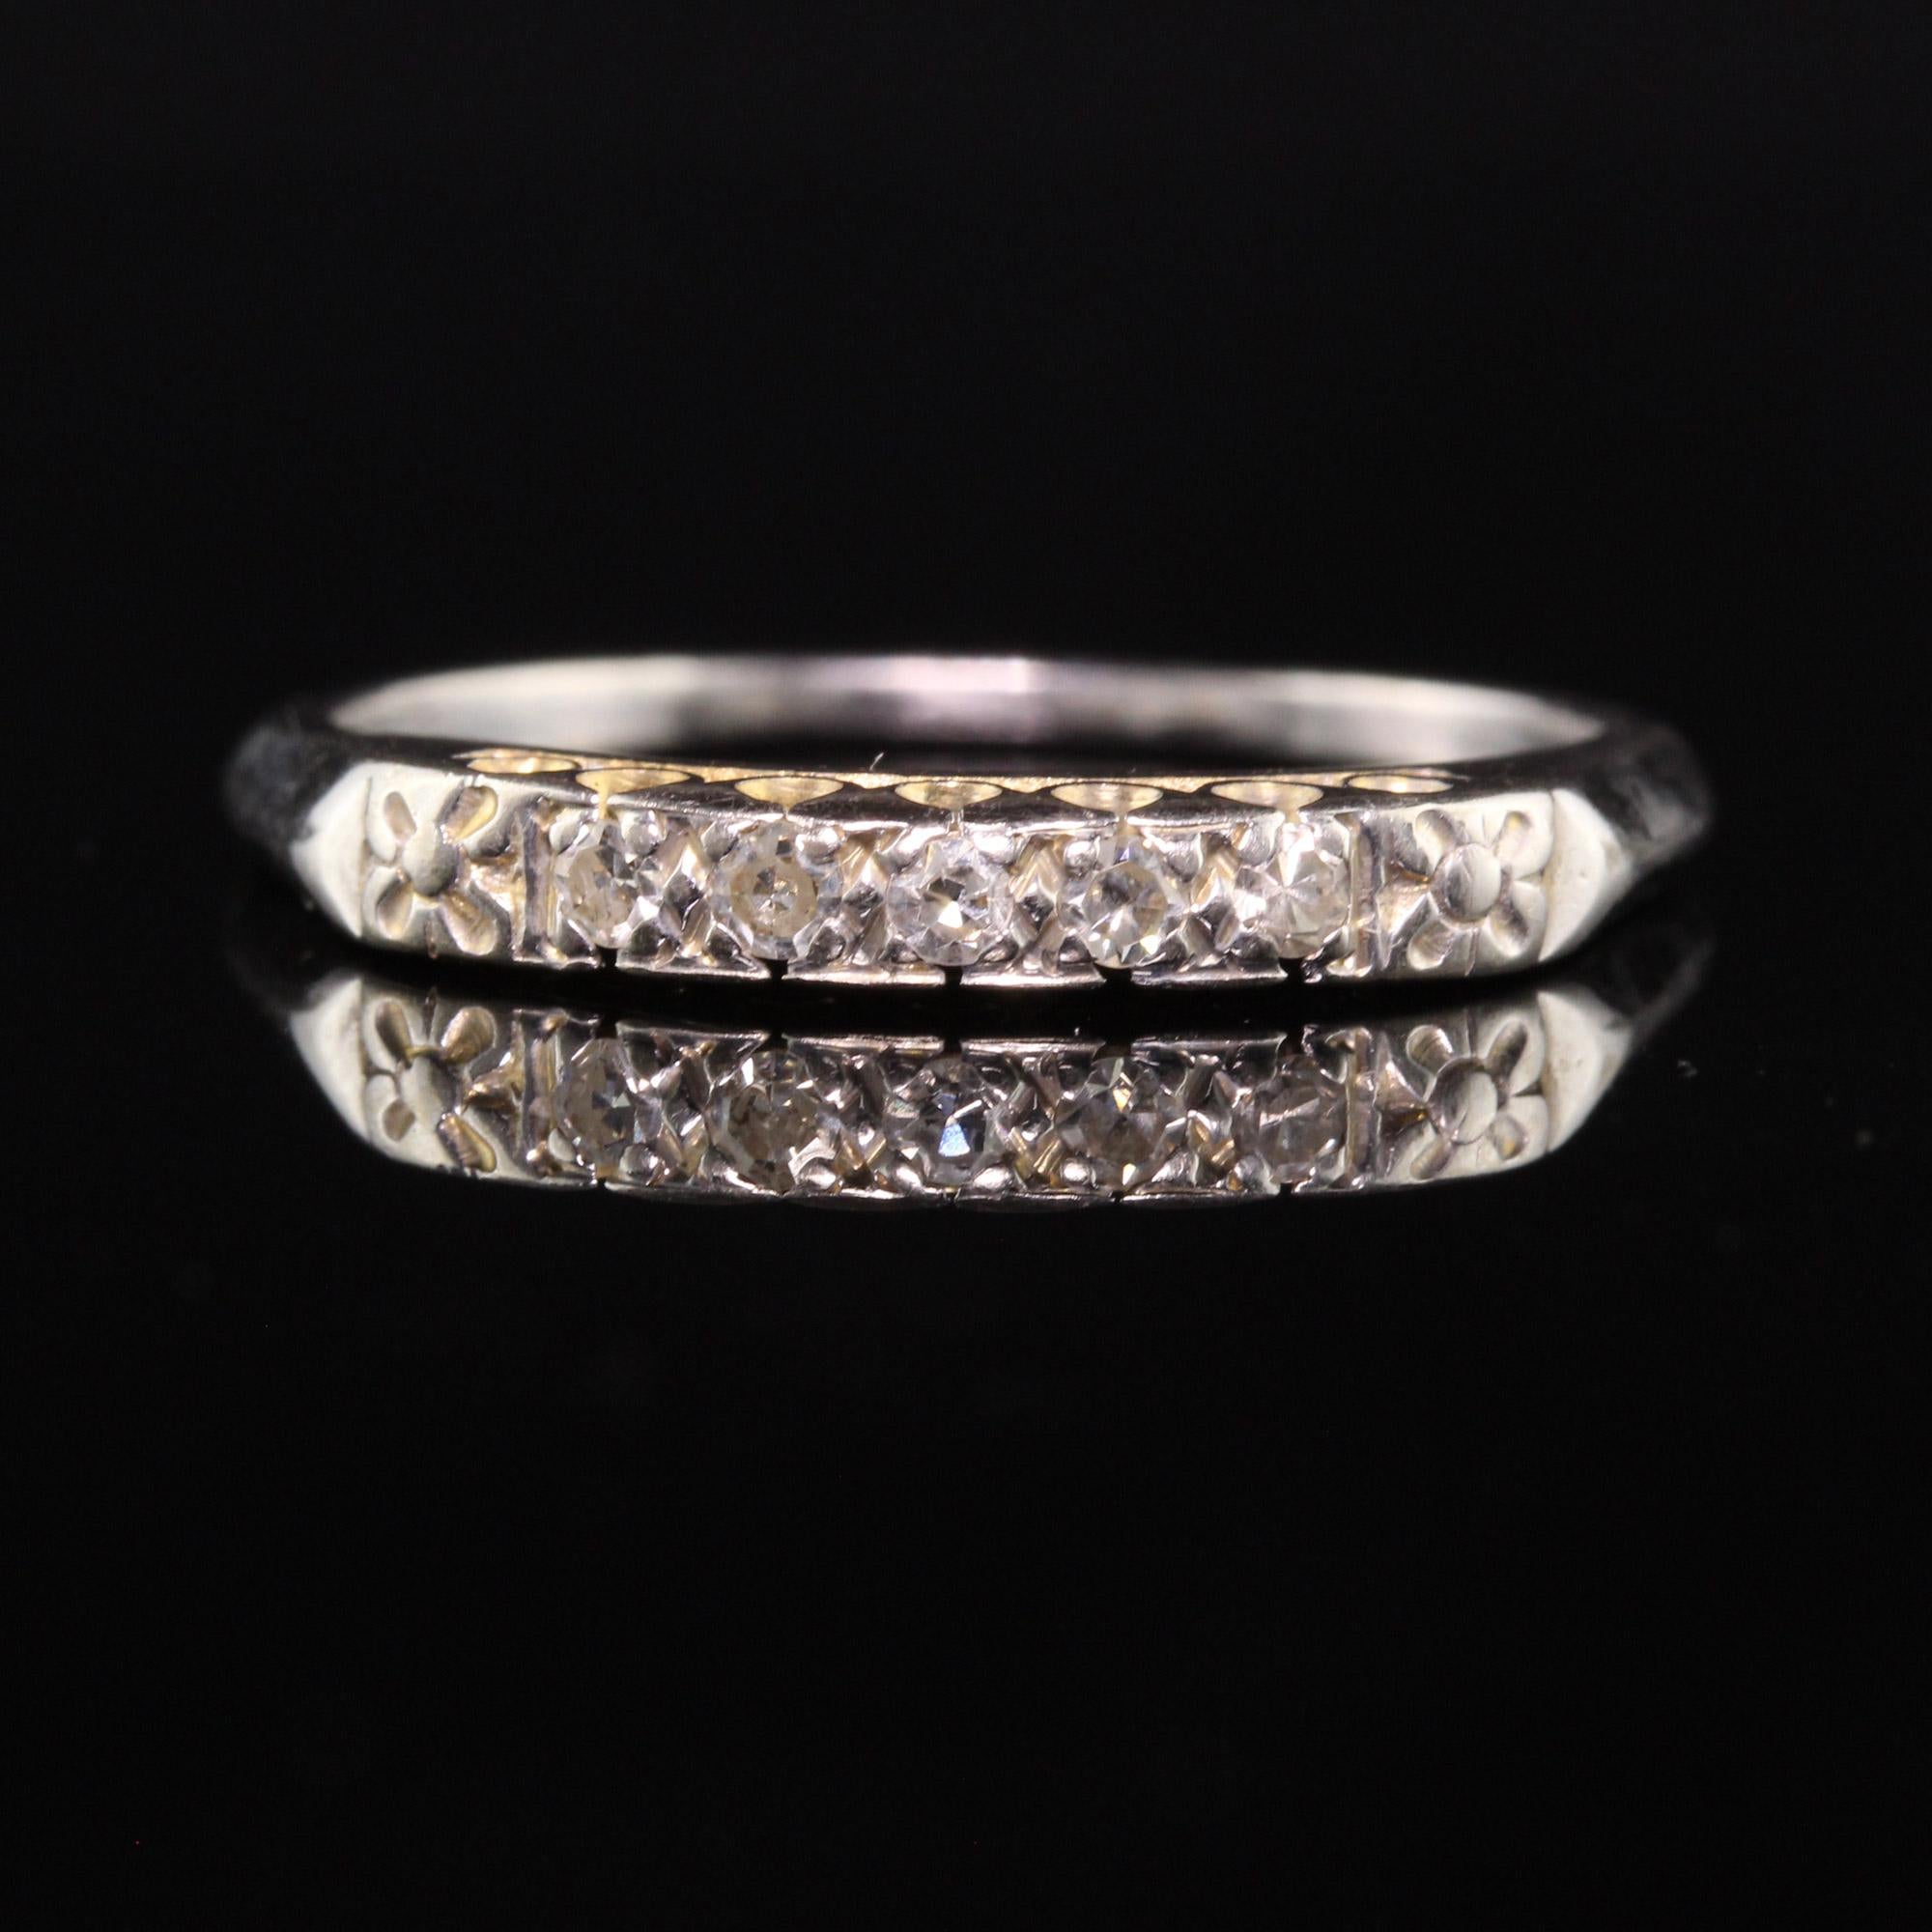 Antique Art Deco 14K White Gold Single Cut Diamond Wedding Band In Good Condition For Sale In Great Neck, NY